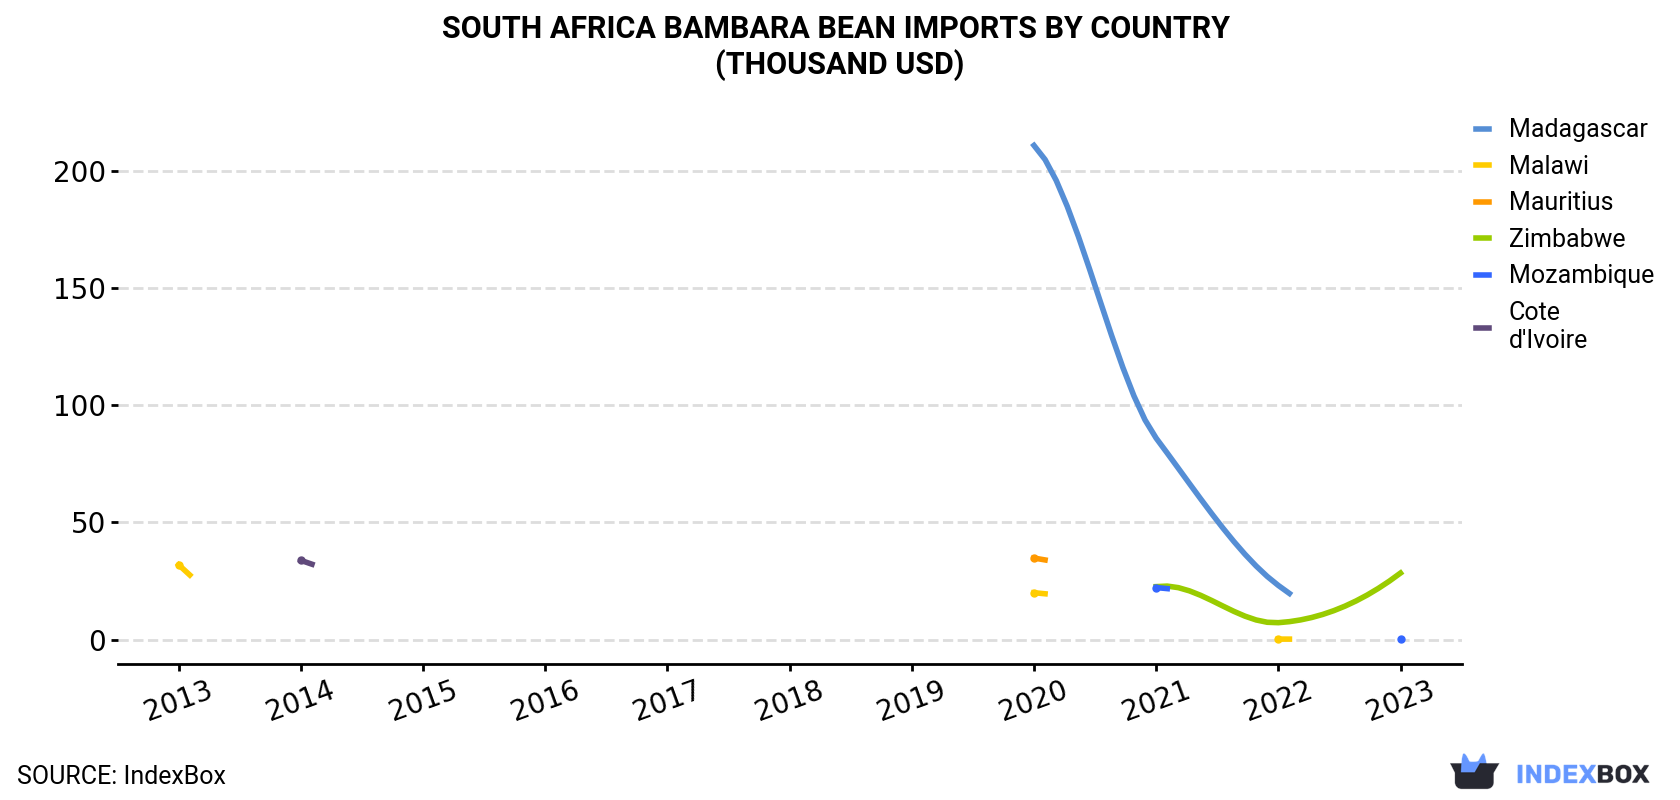 South Africa Bambara Bean Imports By Country (Thousand USD)